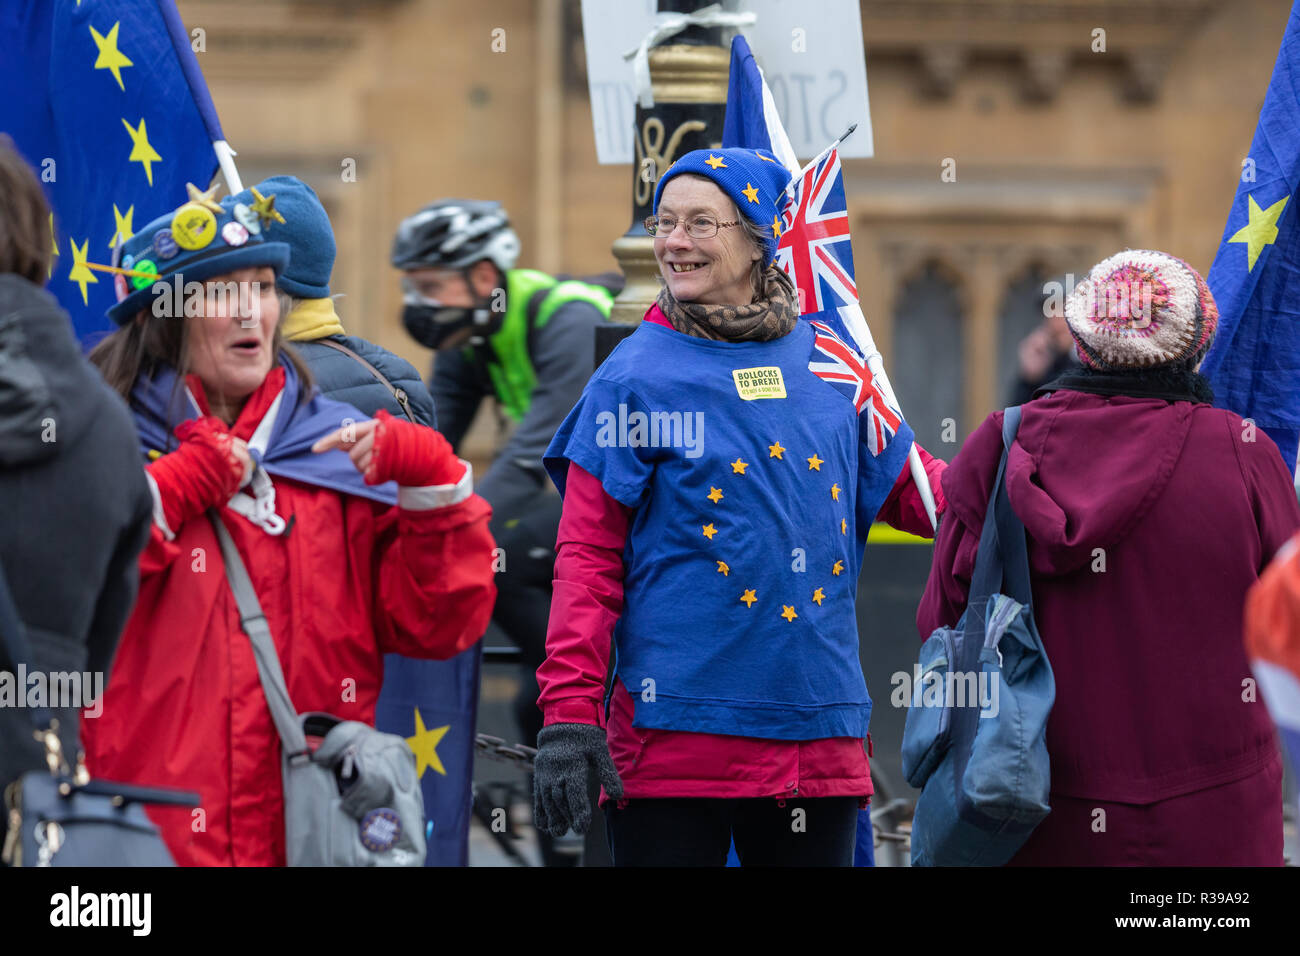 London, UK 21st November 2018. Stand of Defiance European Movement (SODEM) Brexit protest outside the Houses of Parliament in London. Credit: Andy Morton/Alamy Live News Stock Photo